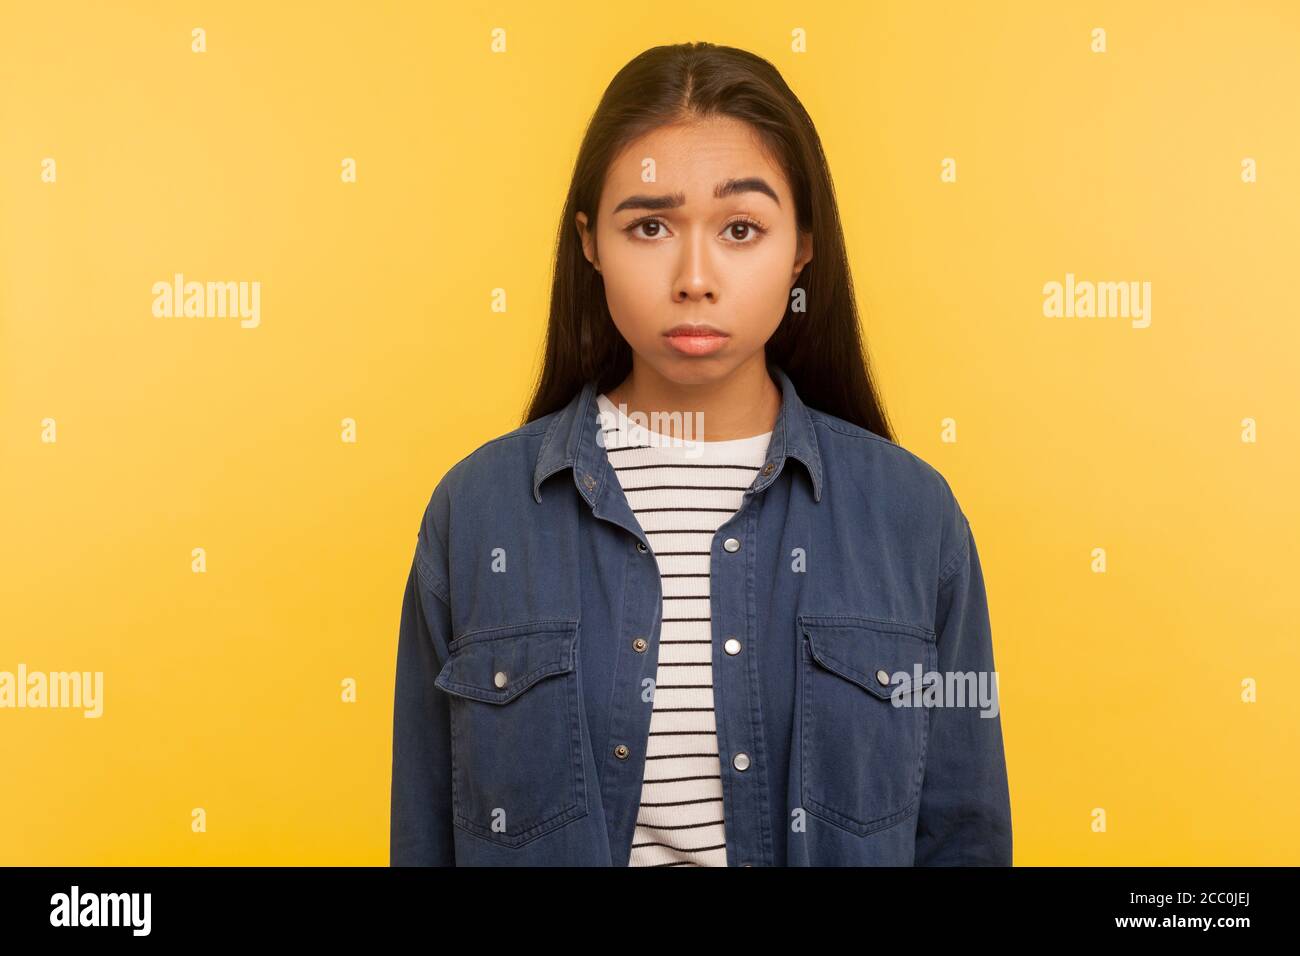 Portrait of upset girl in denim shirt looking at camera with gloomy displeased grimace, feeling annoyed and dissatisfied with defeat, negative emotion Stock Photo